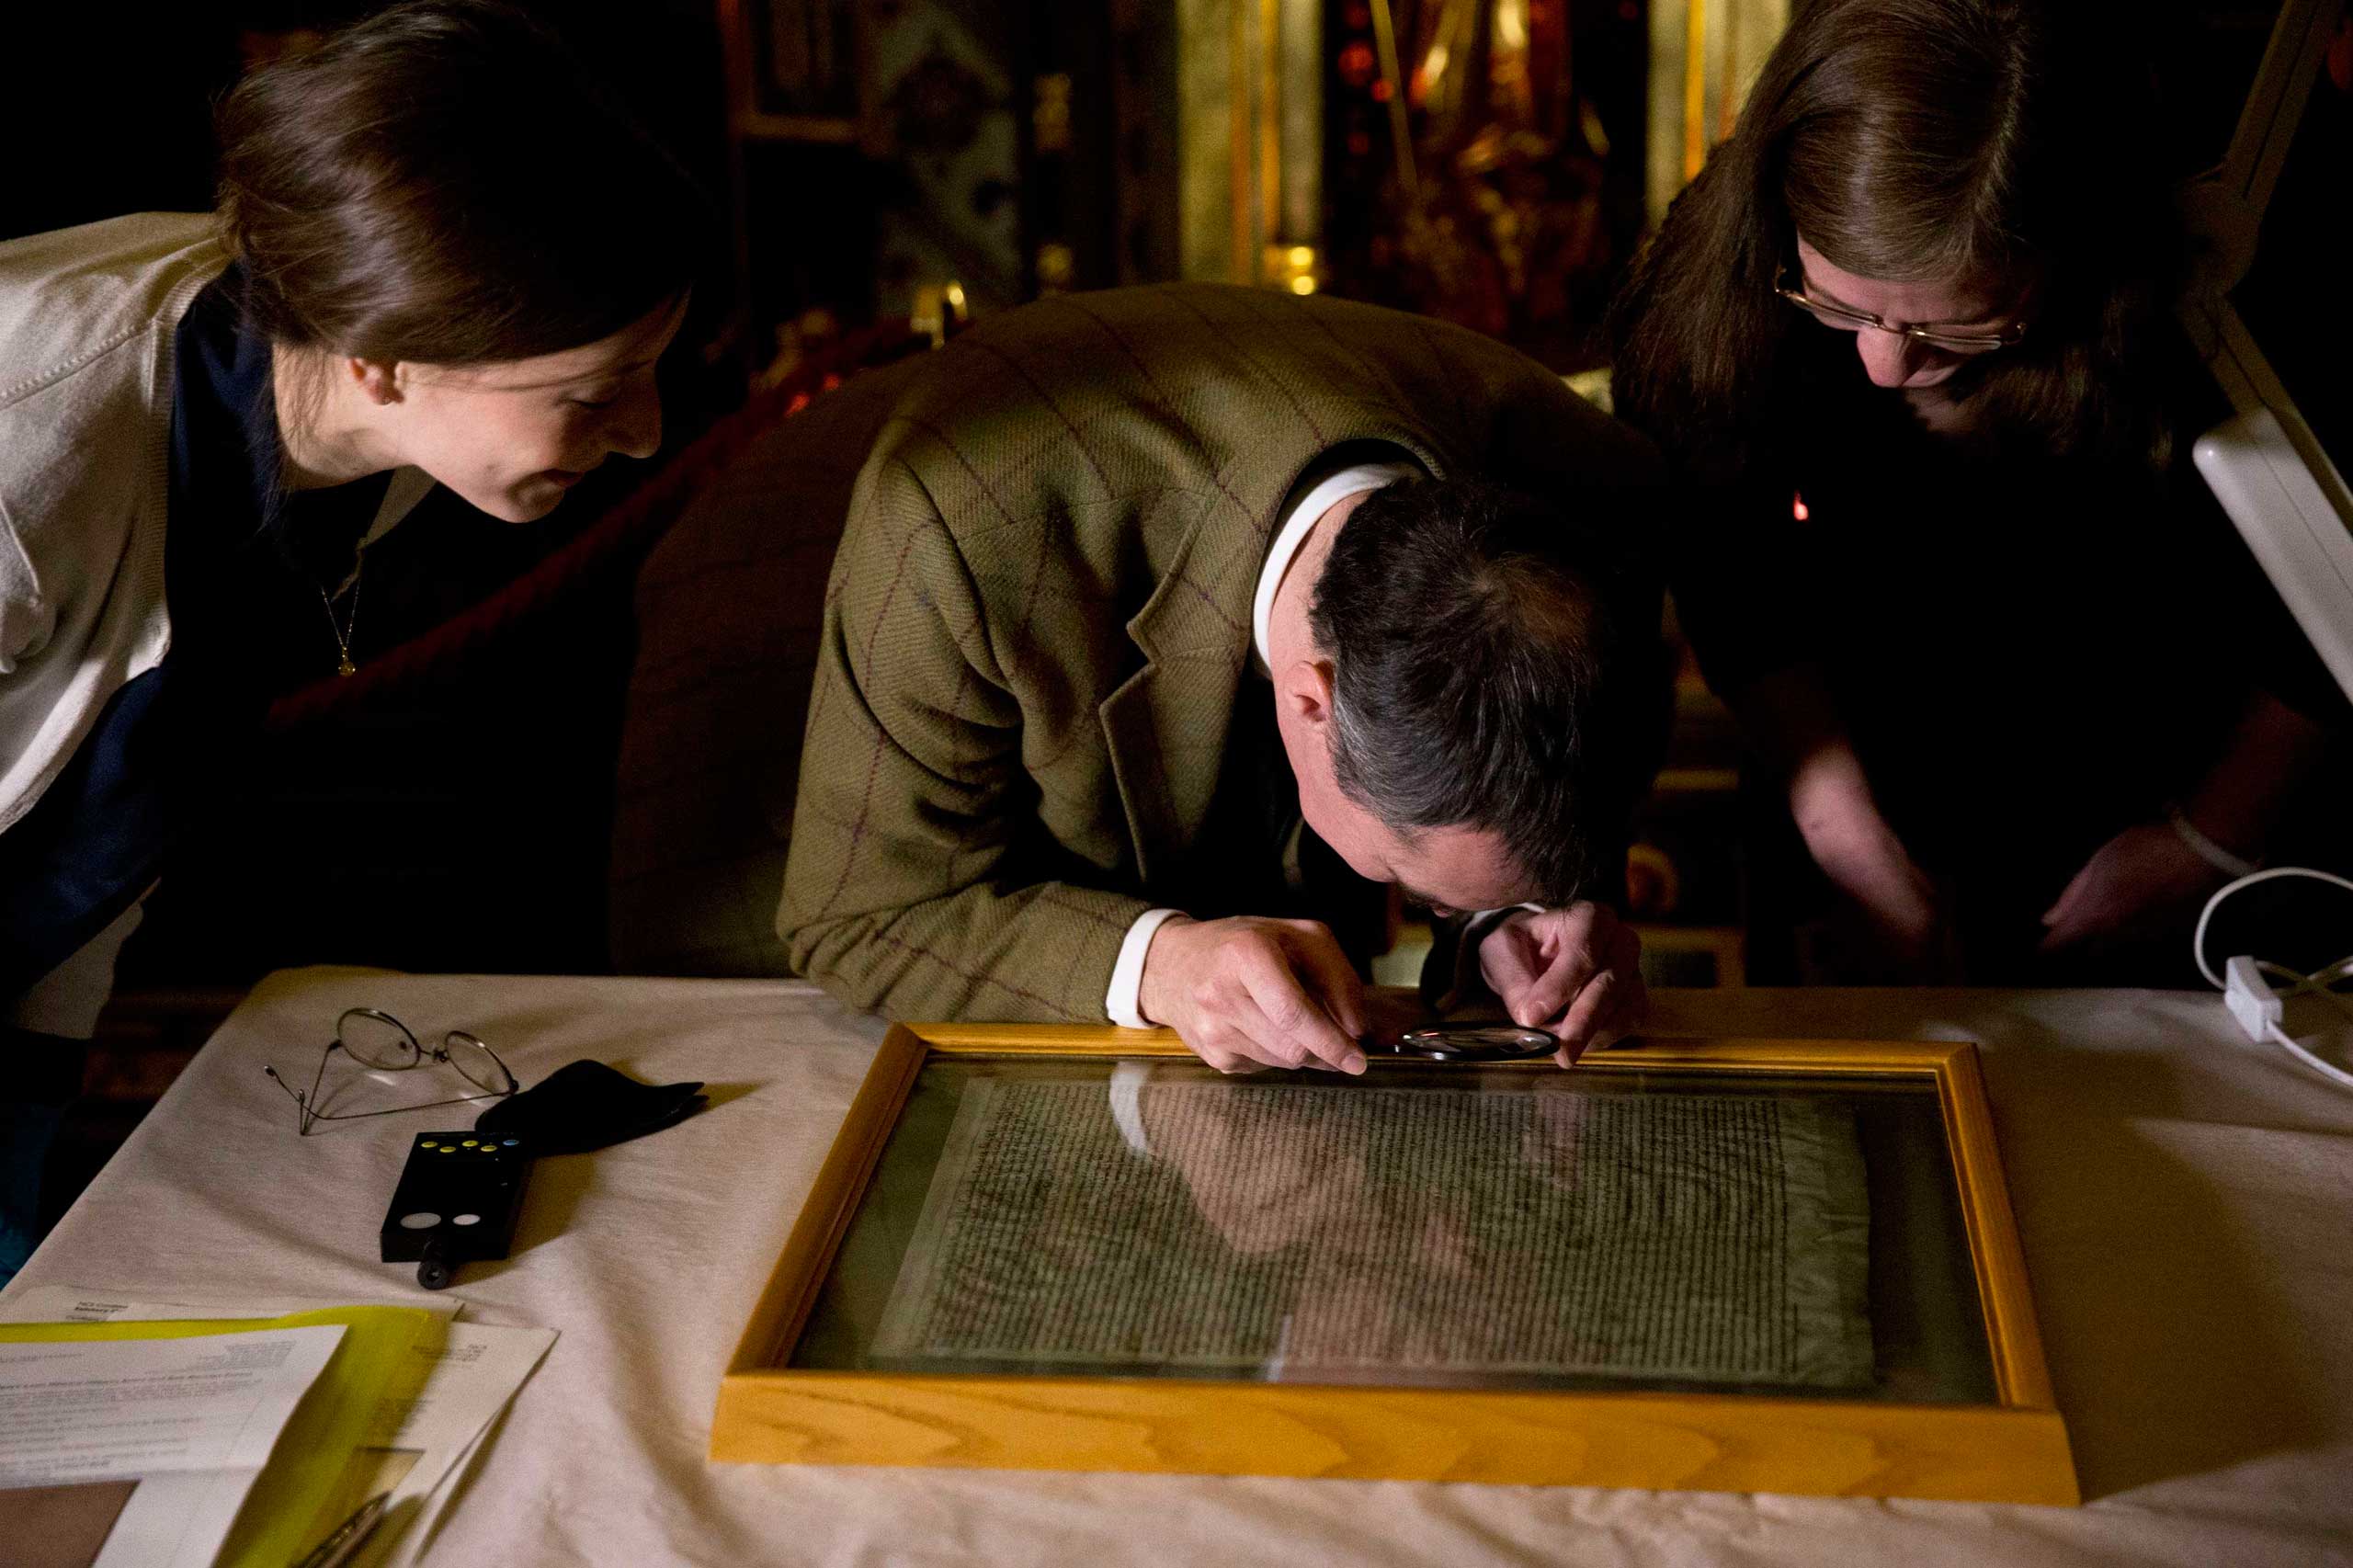 The Salisbury Cathedral copy of the Magna Carta is viewed by archivists before being displayed alongside the other three surviving original parchment engrossments of the Magna Carta, as they are displayed to mark the 800th anniversary of the sealing of the Magna Carta in 1215, in the Queen's Robing Room at the Houses of Parliament in London on Feb. 5, 2015. (Matt Dunham—Pool/Reuters)